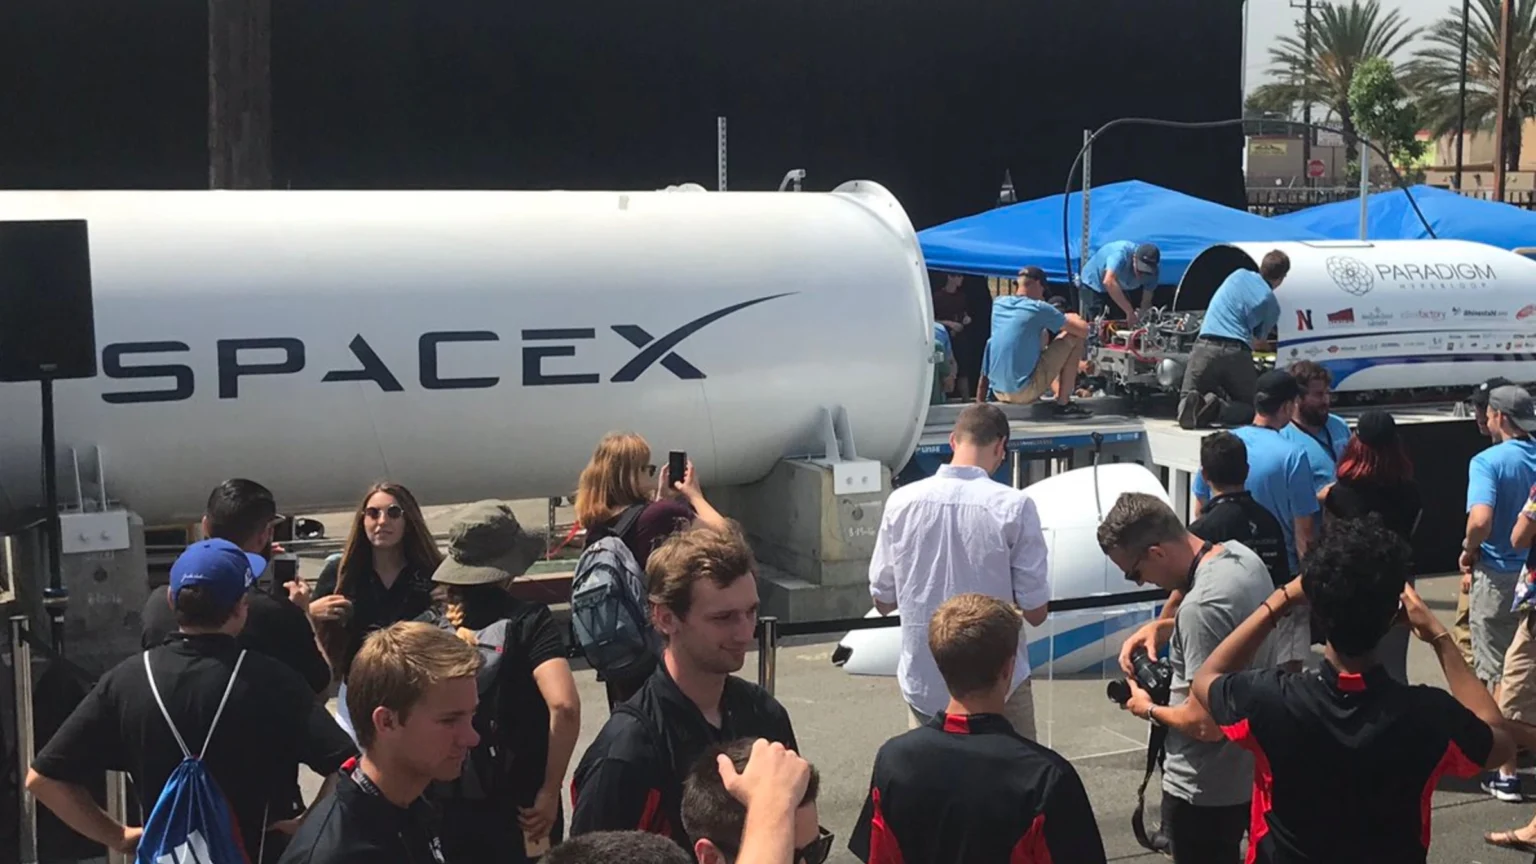 spacex-accused-by-us-labor-agency-of-unlawfully-firing-employees-for-criticizing-elon-musk